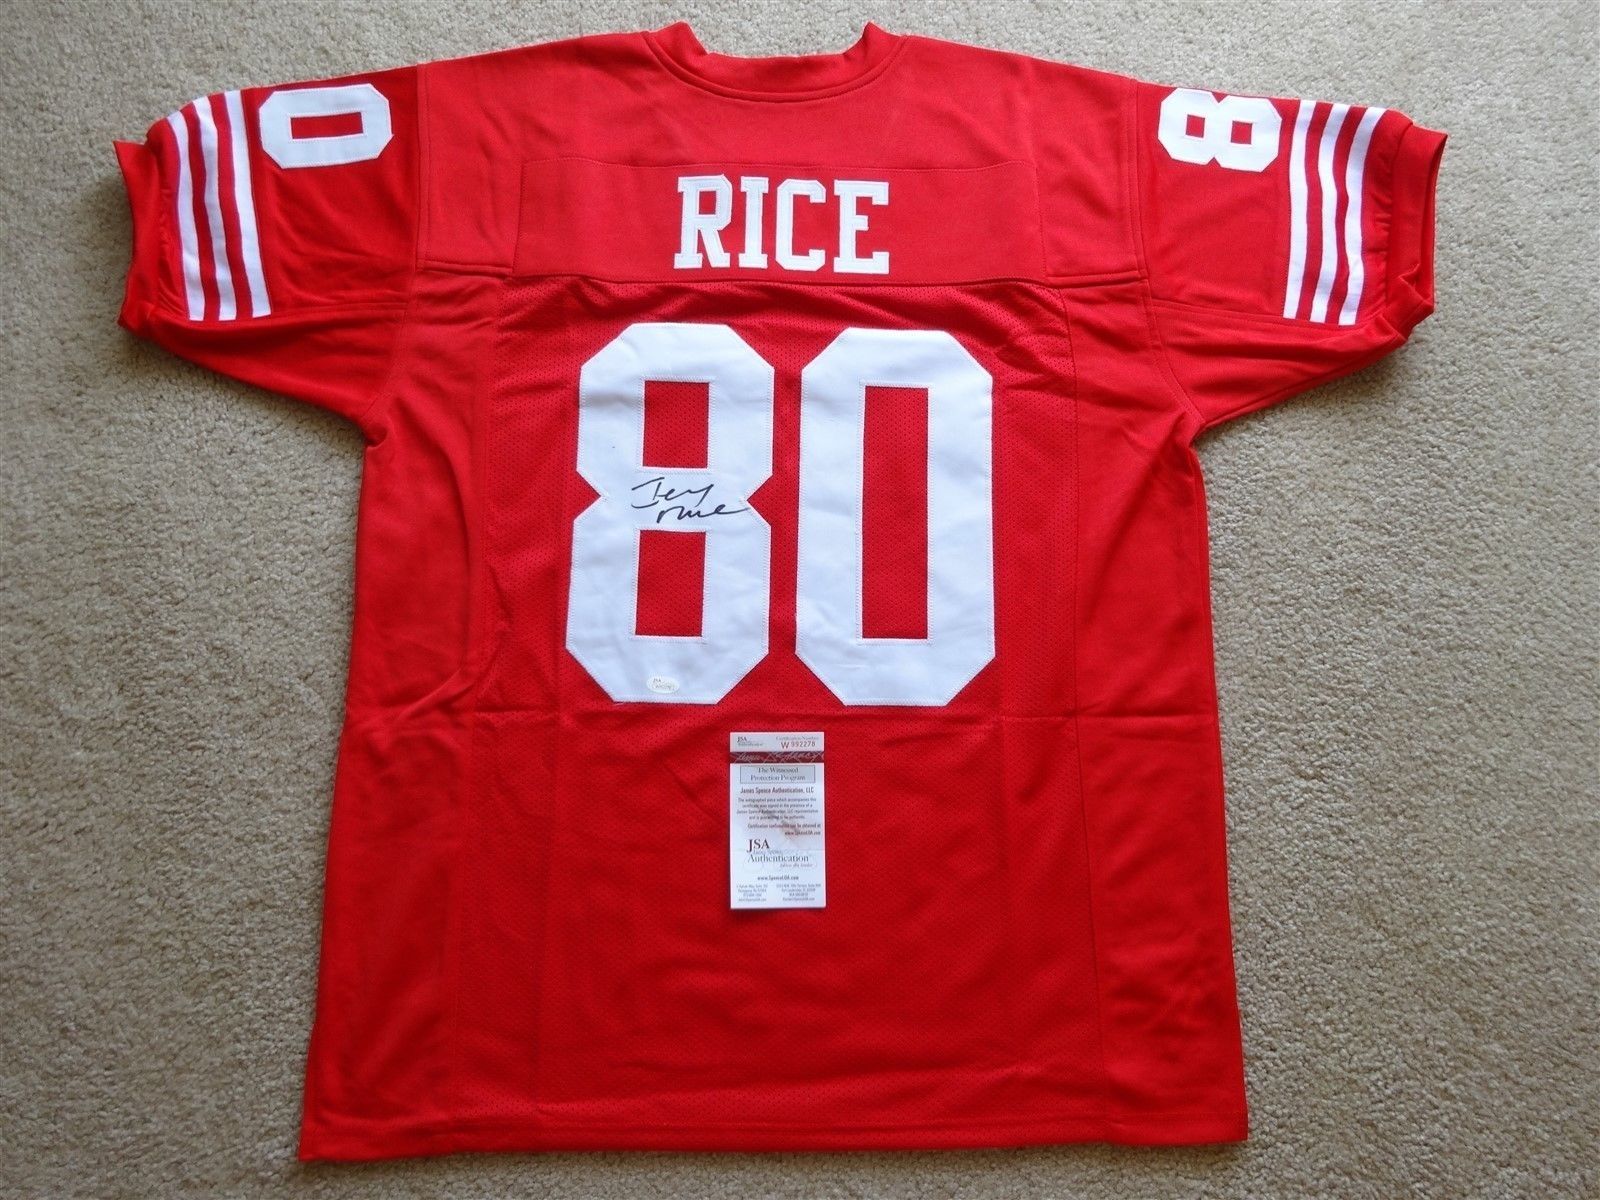 JERRY RICE SIGNED AUTO SAN FRANCISCO 49ERS RED JERSEY JSA AUTOGRAPHED